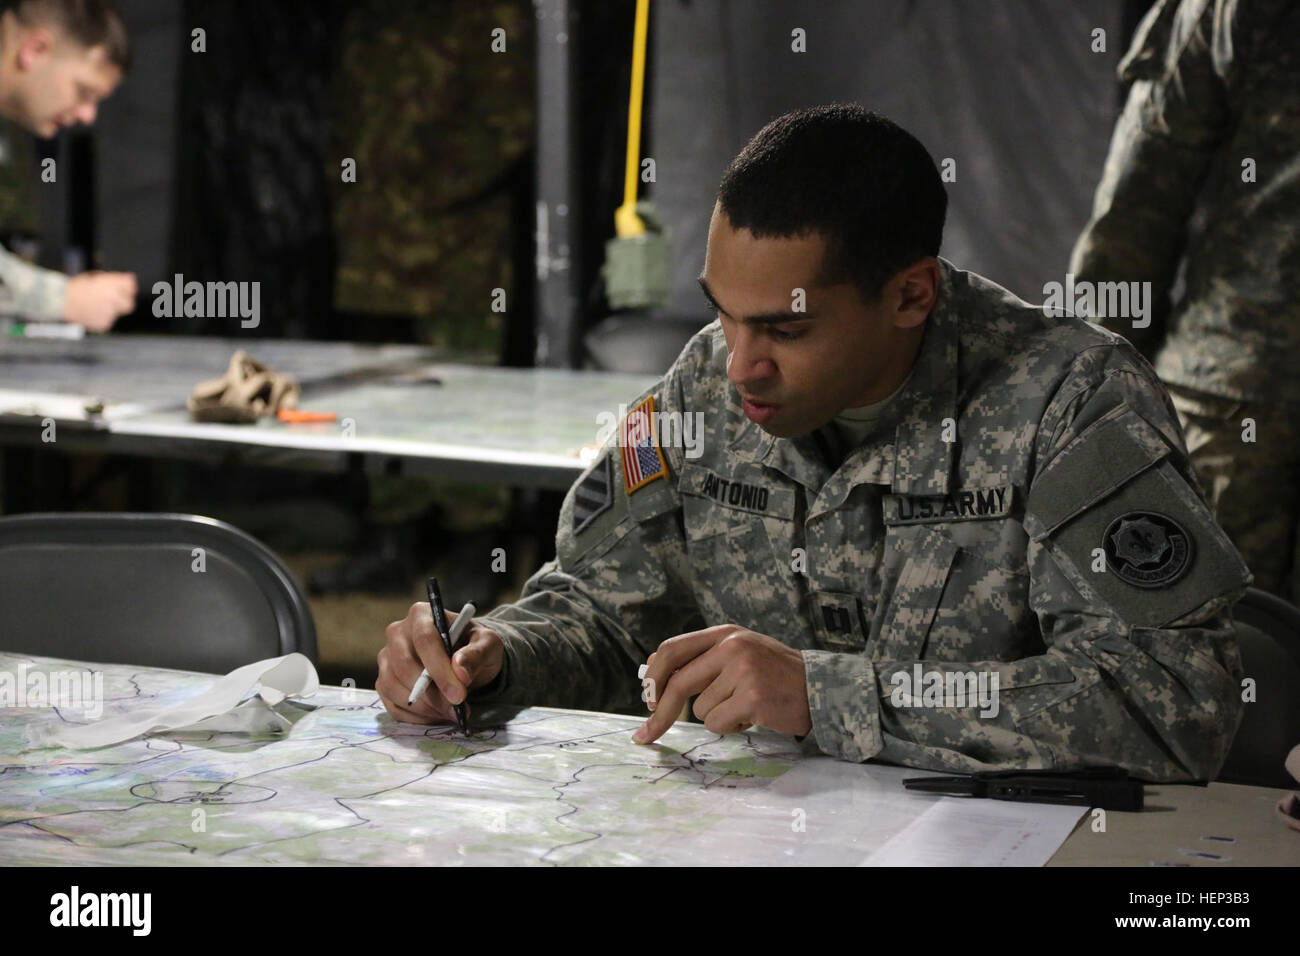 U.S. Army Capt. Nicholas Antonio of 2nd Cavalry Regiment, the brigade engineer officer, updates a map in preparation for a course of action brief during exercise Allied Spirit at the Joint Multinational Readiness Center in Hohenfels, Germany, Jan. 23, 2015. Exercise Allied Spirit includes more than 2,000 participants from Canada, Hungary, Netherlands, United Kingdom, and the U.S. Allied Spirit is exercising tactical interoperability and testing secure communications within Alliance members. (U.S. Army photo by Sgt. Gemma Iglesias/Released) Allied Spirit I 150123-A-QC664-001 Stock Photo